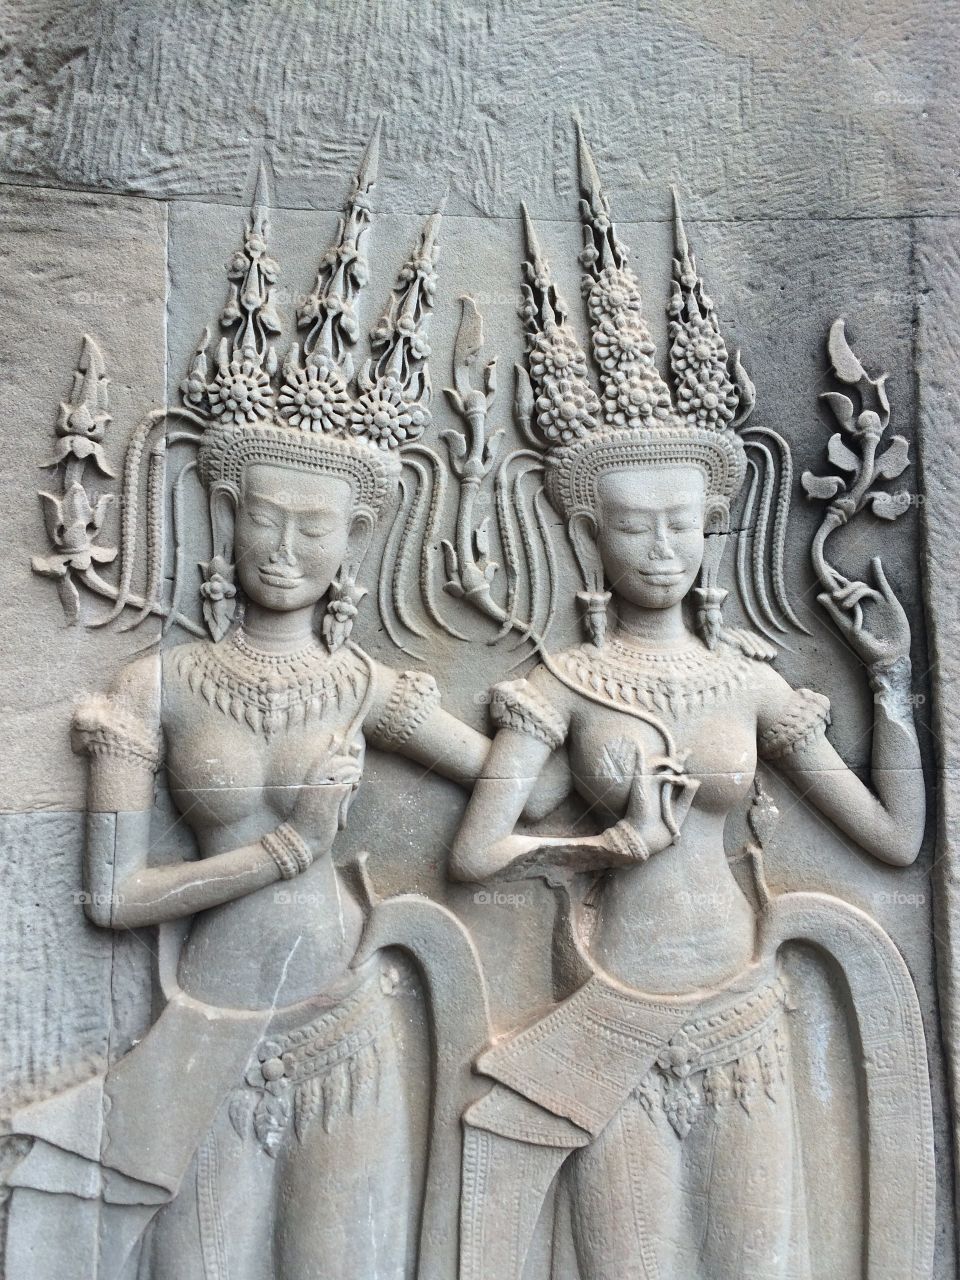 Siem Reap, Cambodia (Angkor Wat temple): nude sculptures of Eastern Asia culture 